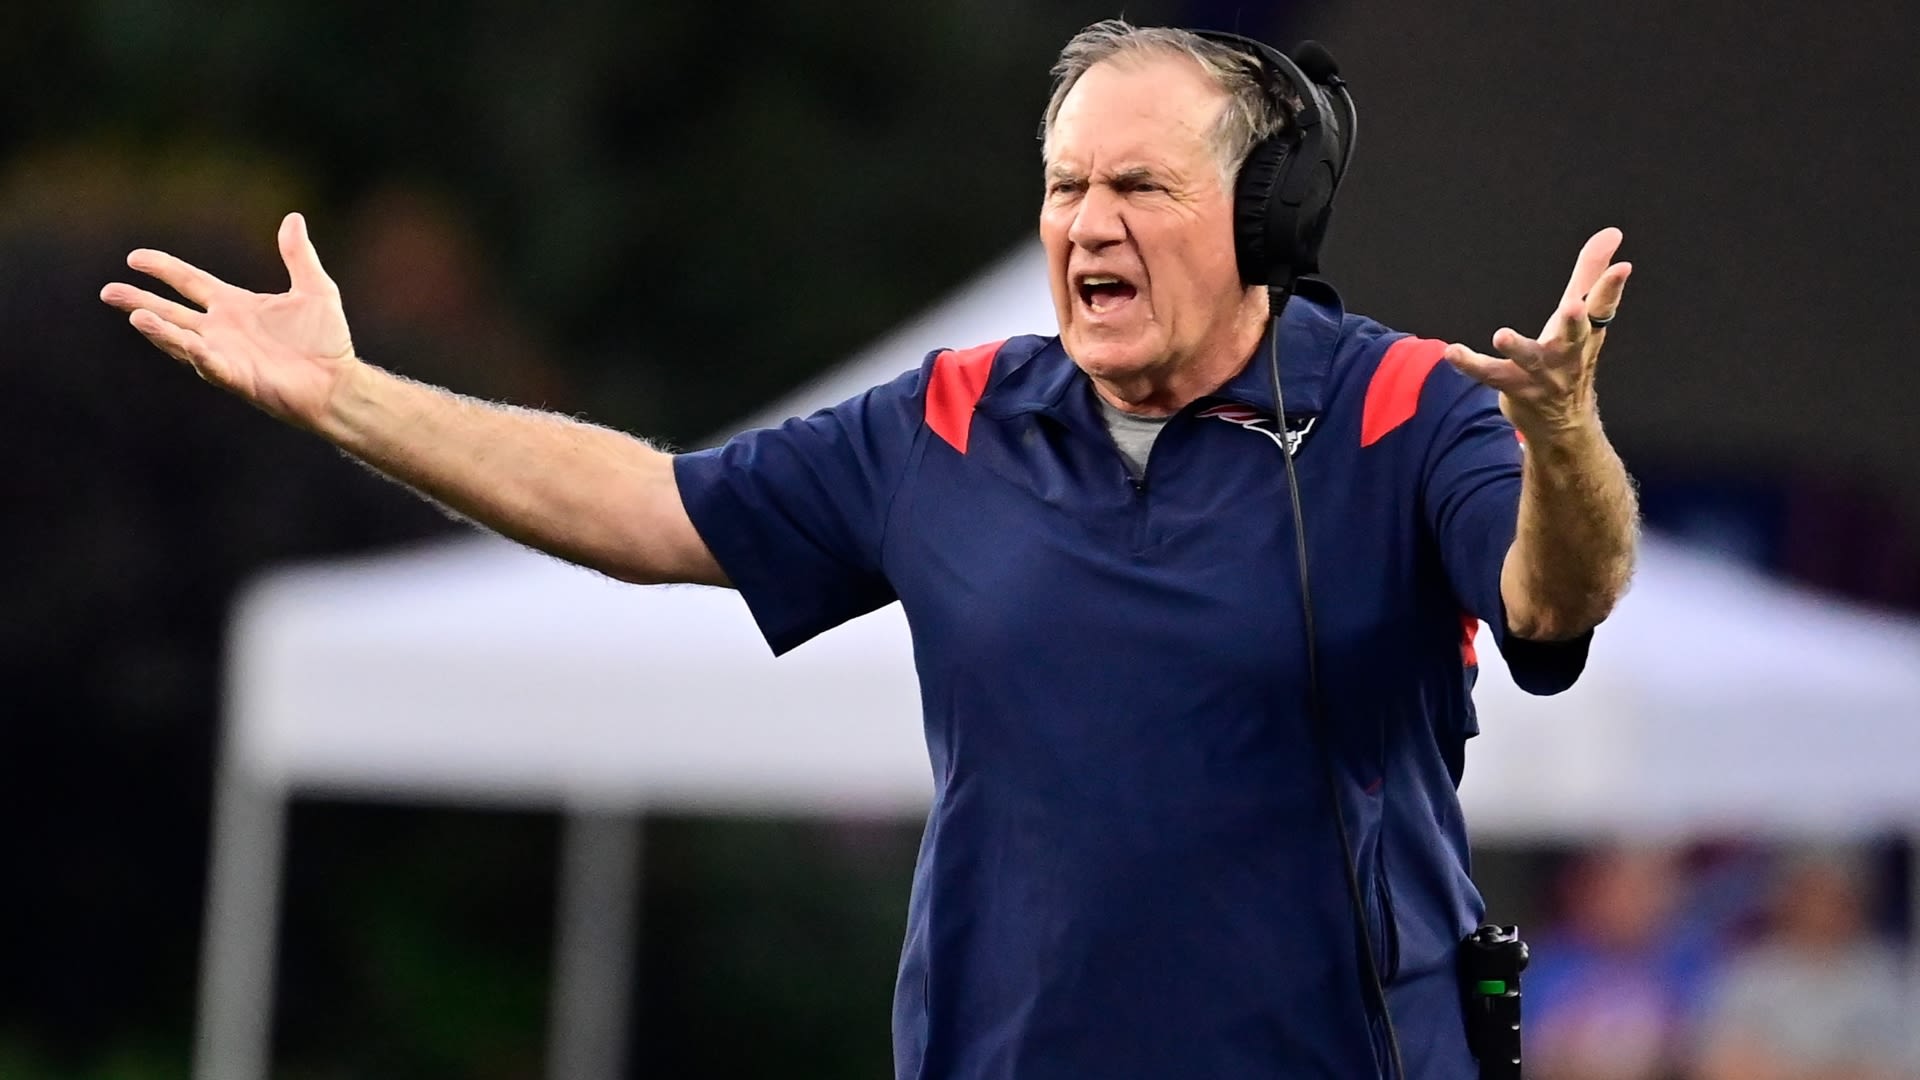 What Patriots Defender Misses About Bill Belichick's Coaching